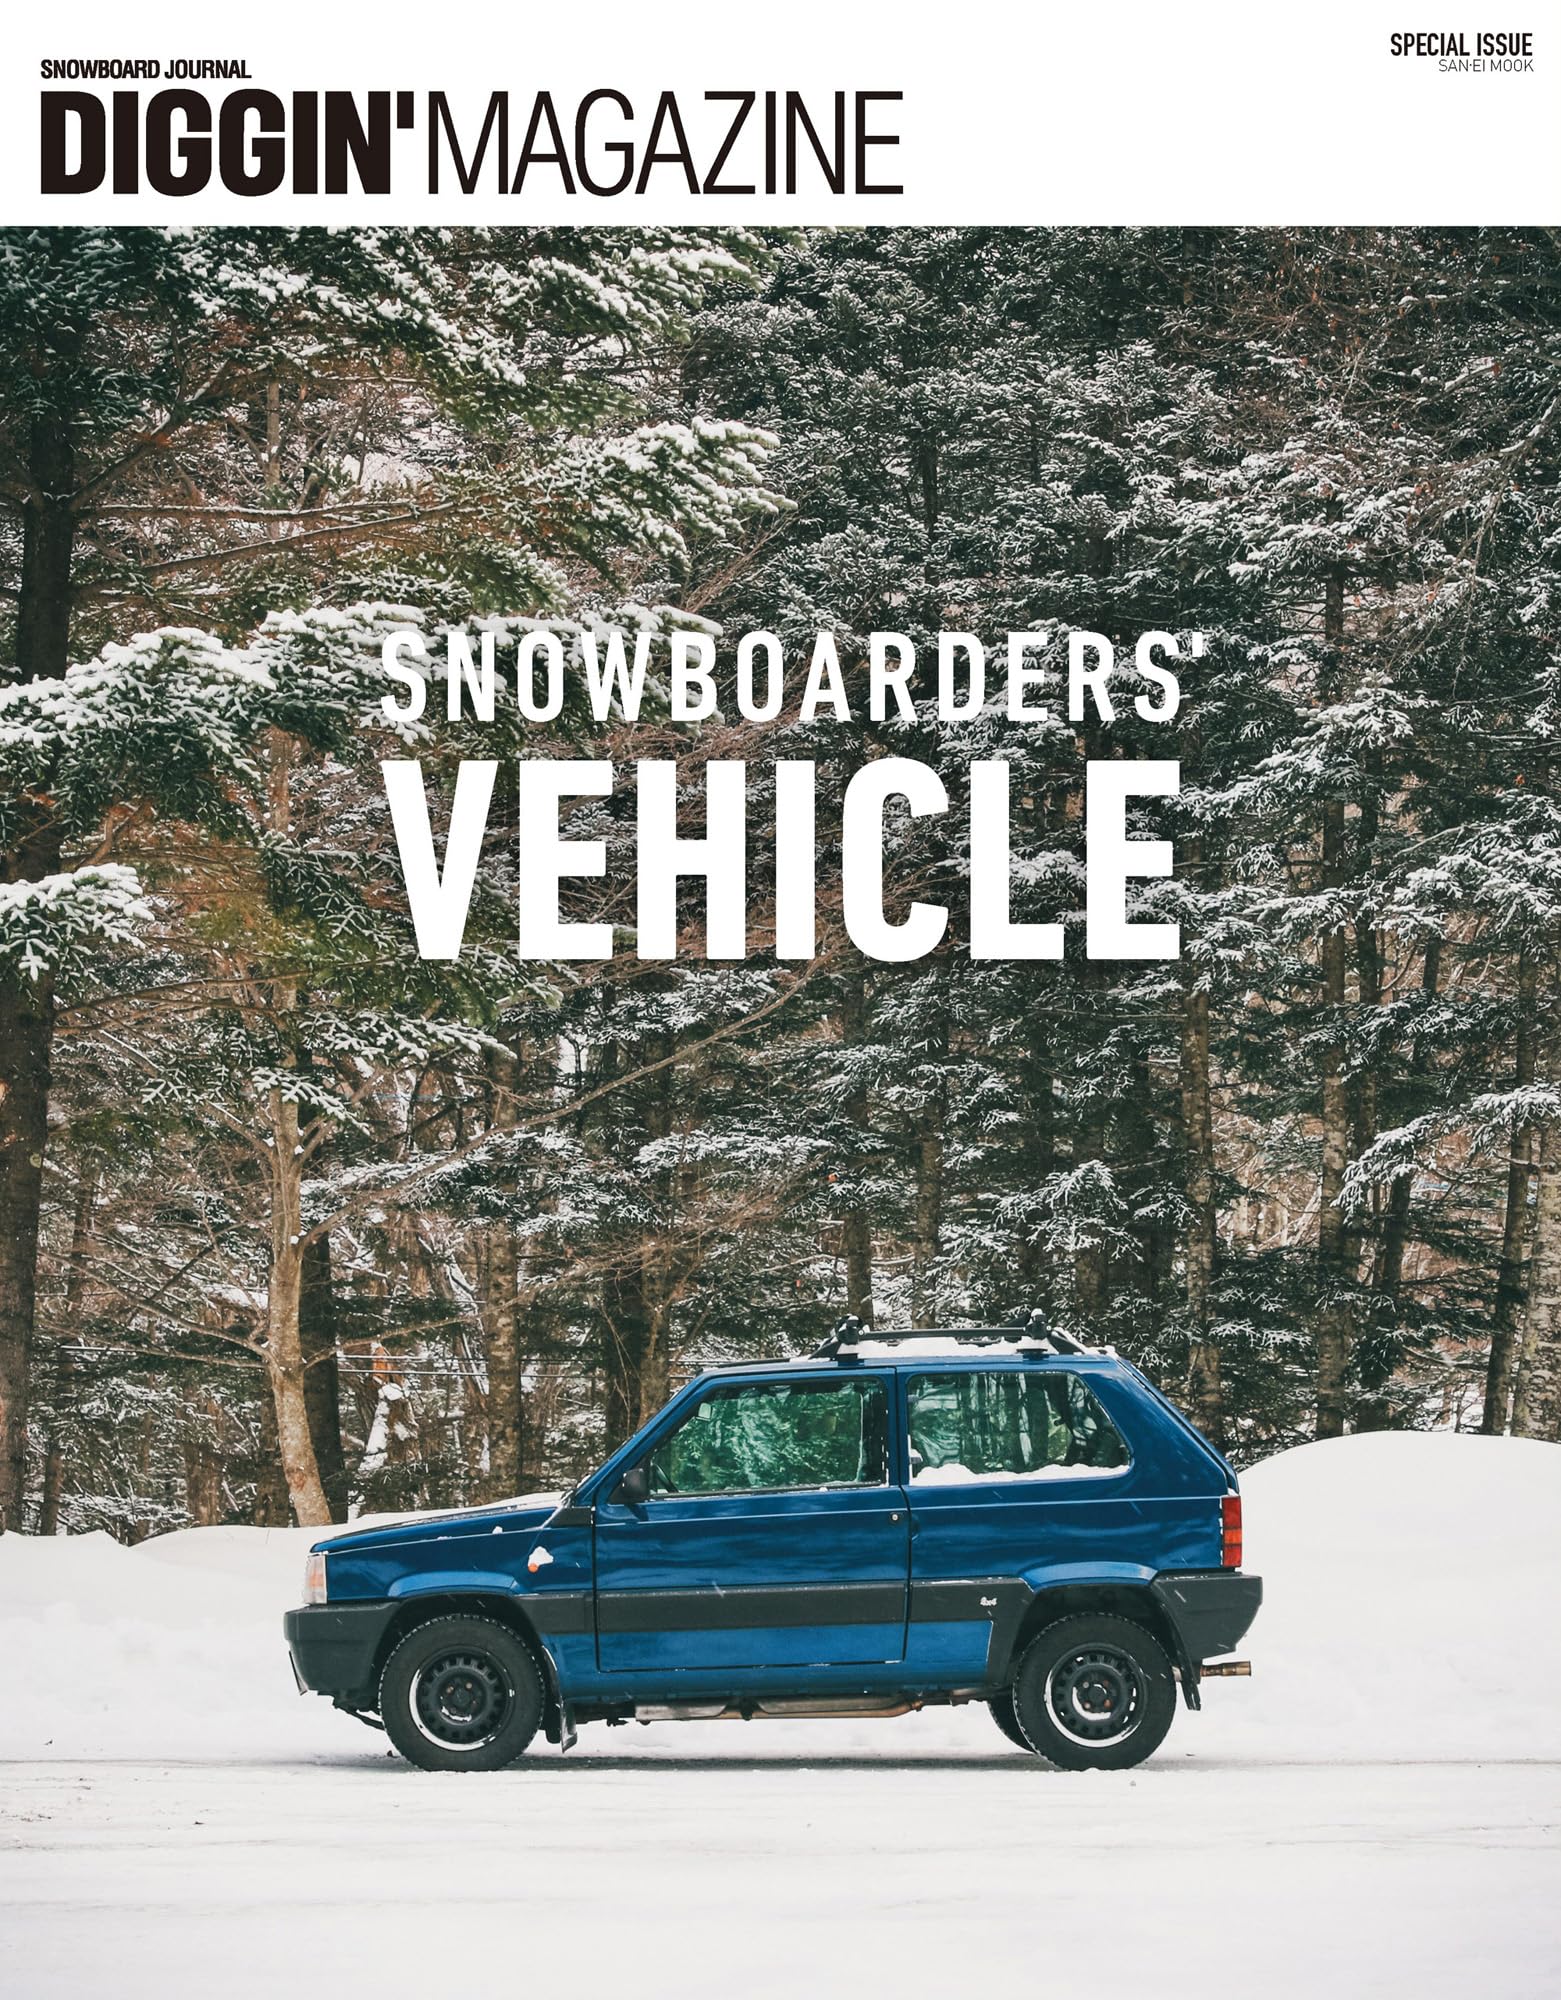 DIGGIN MAGAZINE( ディギンマガジン ) SPECIAL ISSUE SNOWBOARDERS’ VEHICLE (SAN-EI MOOK)